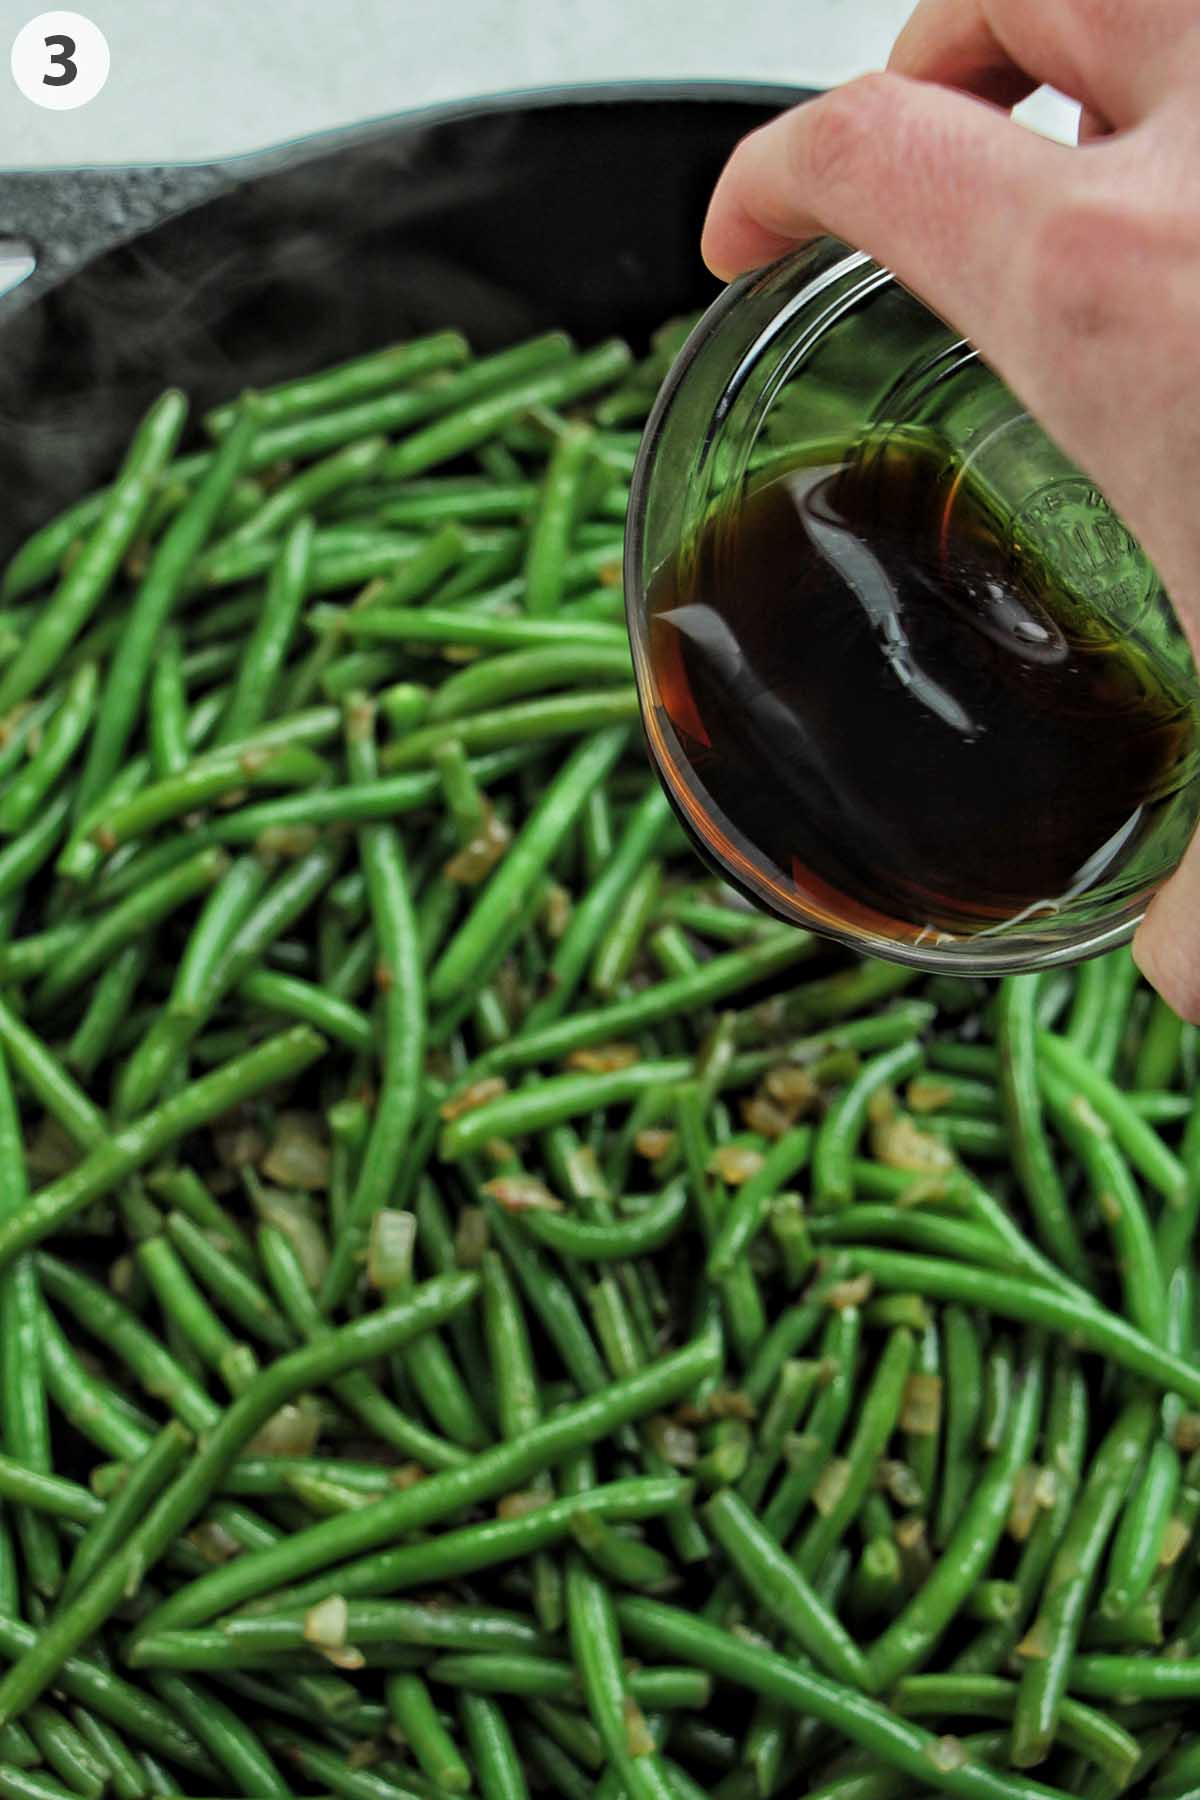 numbered photo dumping soy sauce onto sautéed green beans.